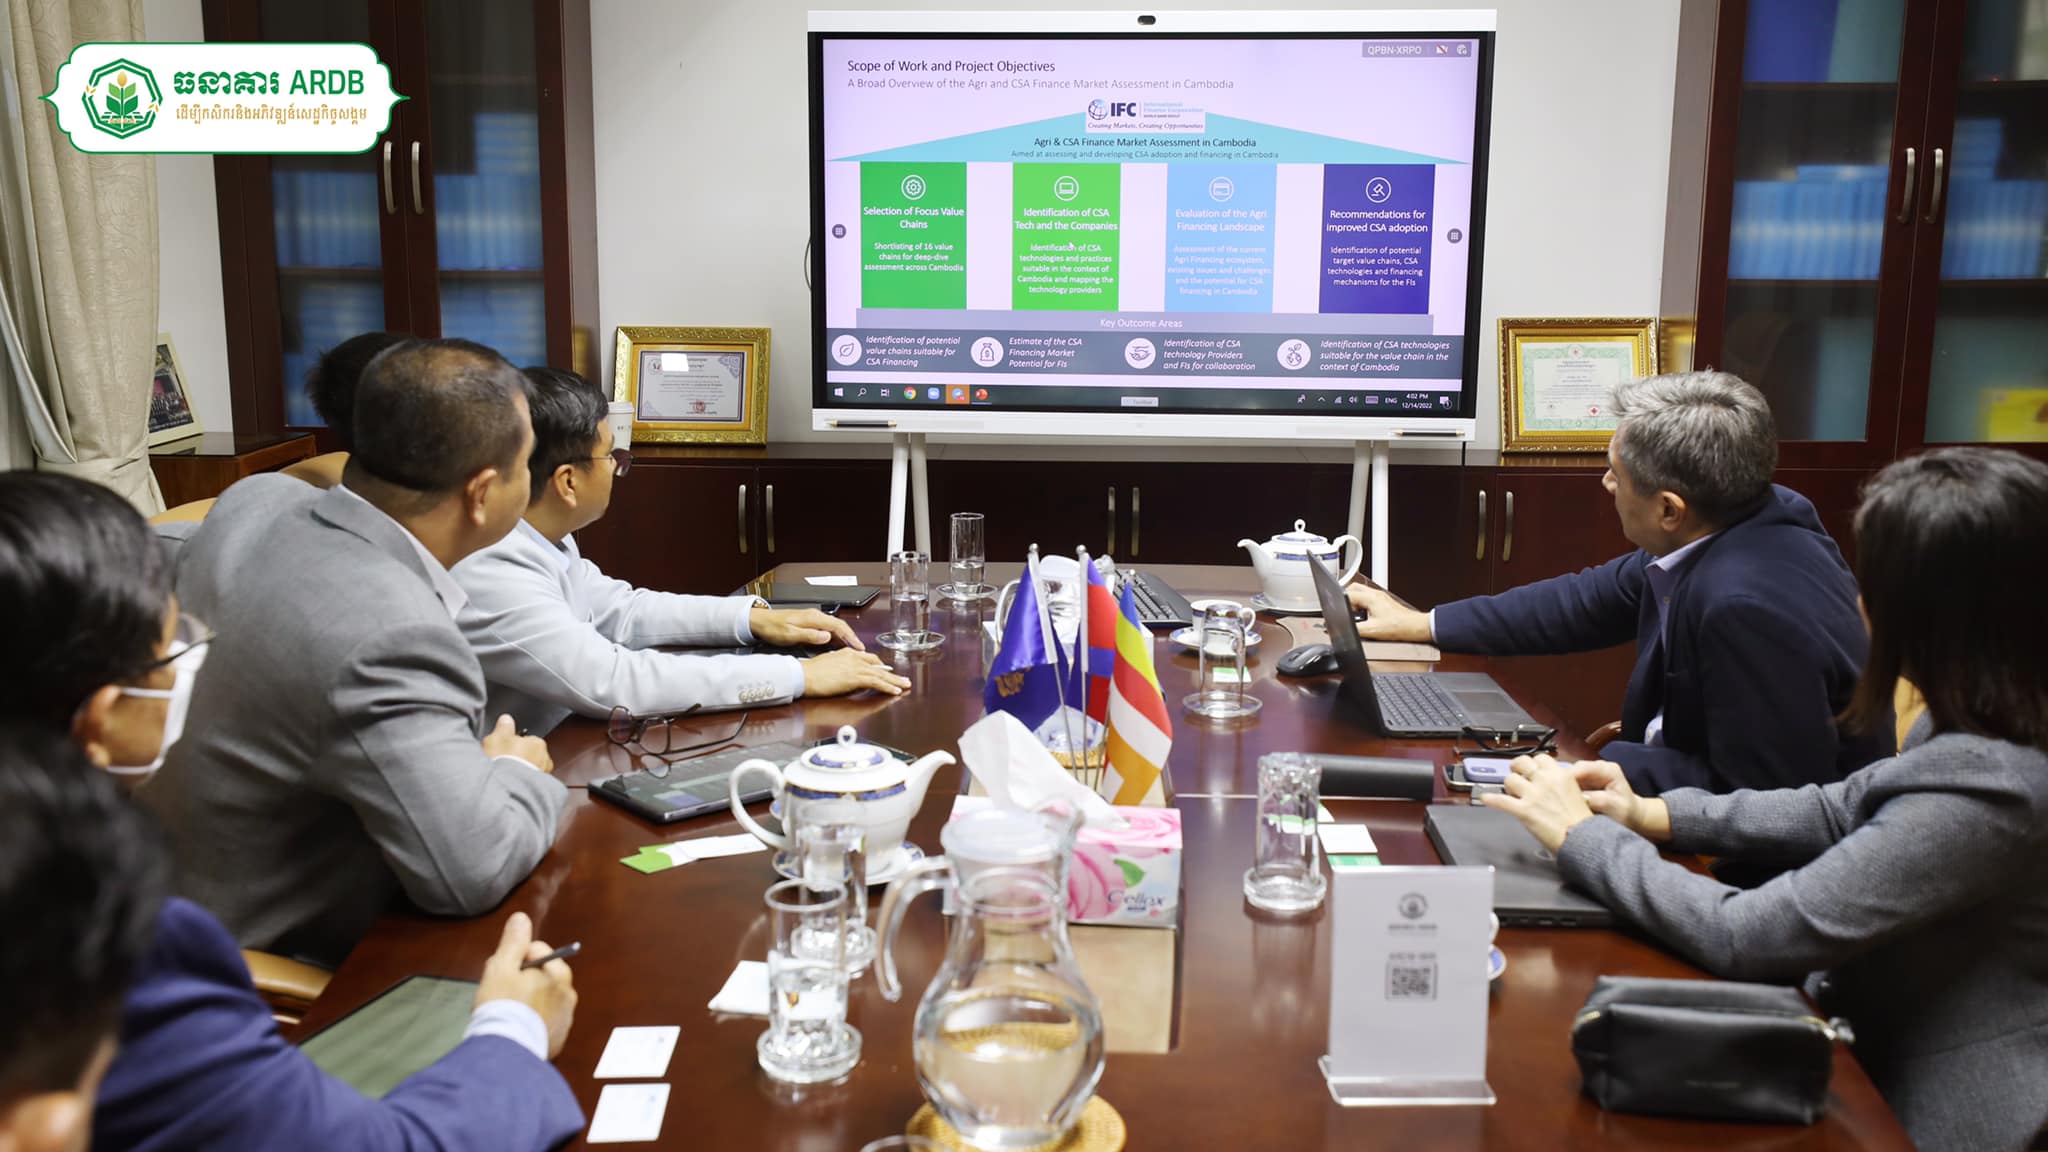 H.E. Dr. KAO Thach, accompanied by Deputy CEO and colleagues, have received a courtesy calls and listen to a presentation focusing on “Agri & CSA Finance Market Assessment in Cambodia”